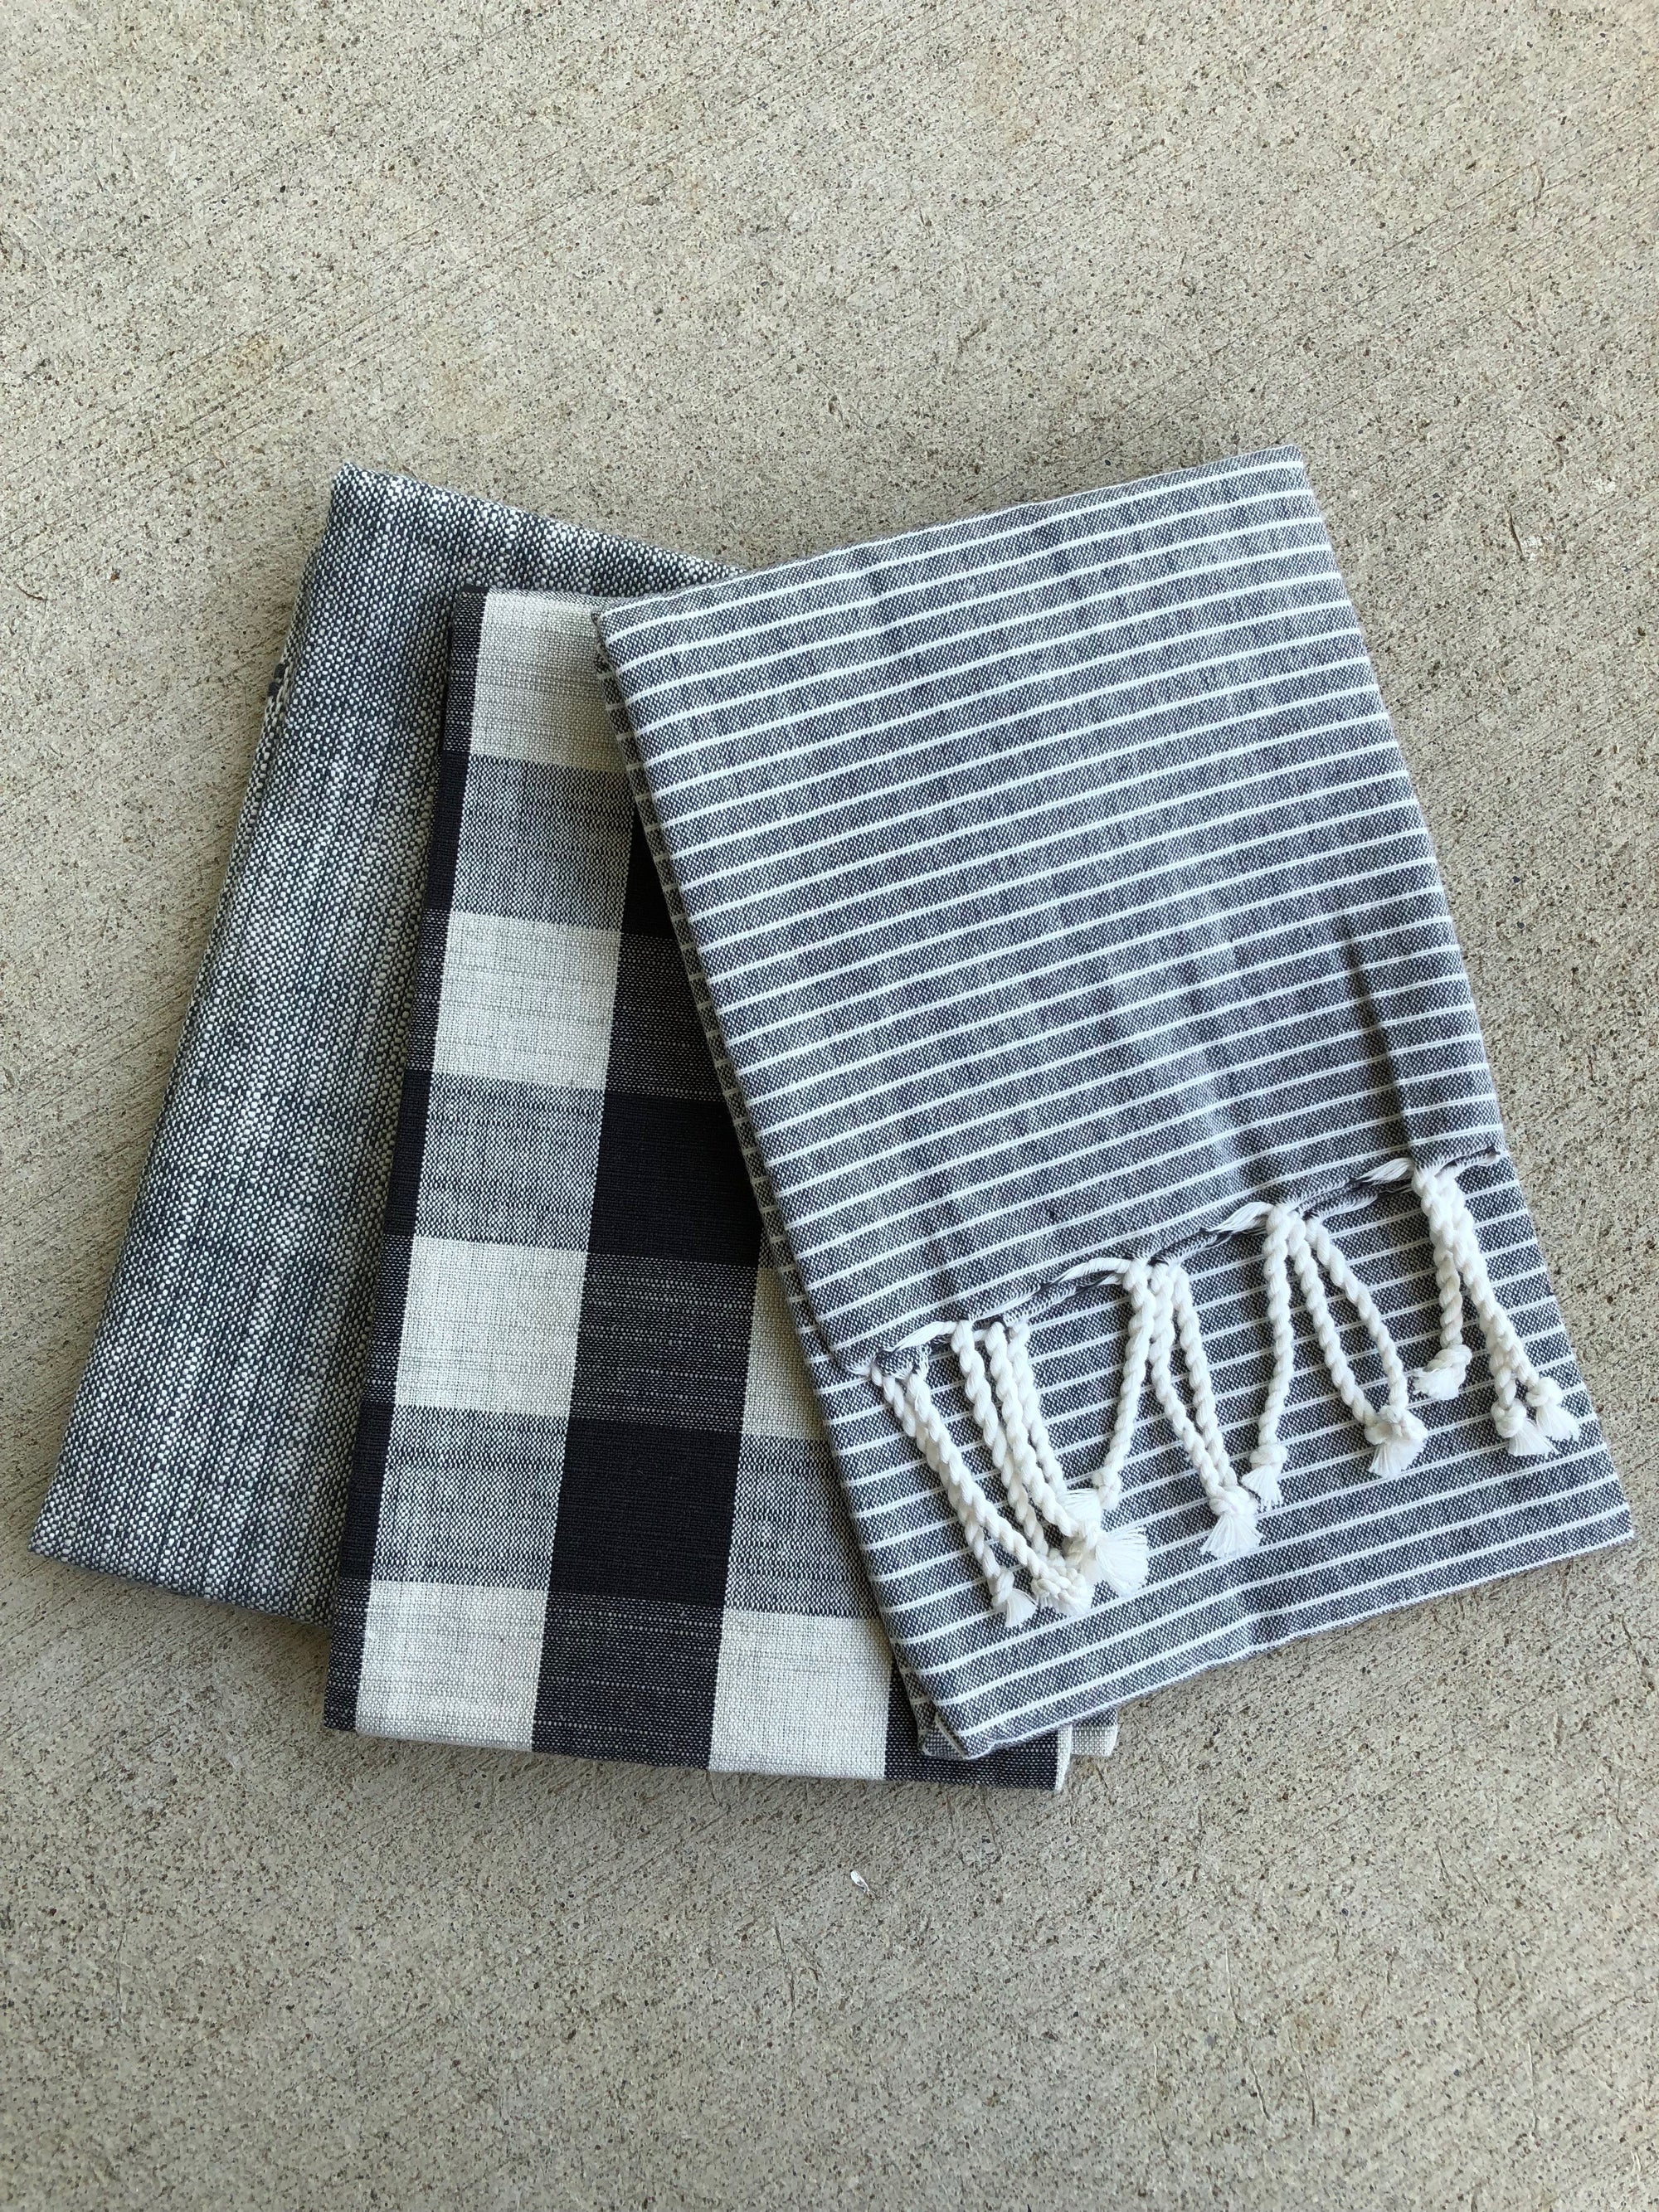 Dish Towel - Modern Country Set of 3